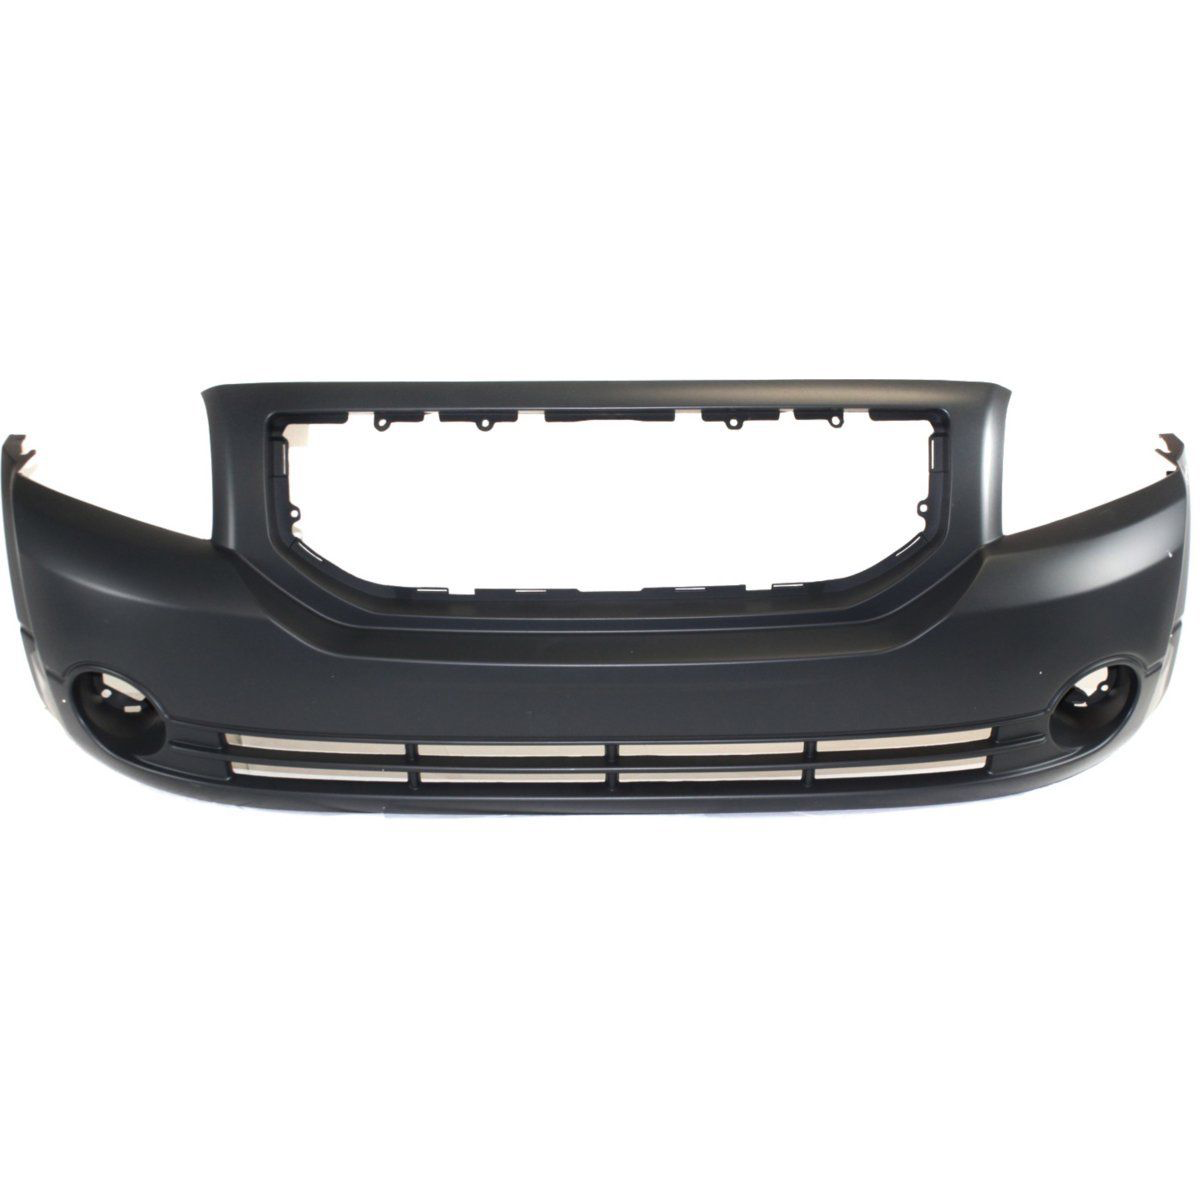 2007-2012 DODGE CALIBER Front Bumper Cover SE|SXT  w/Fog Lamps  w/o Foam Absorber Painted to Match